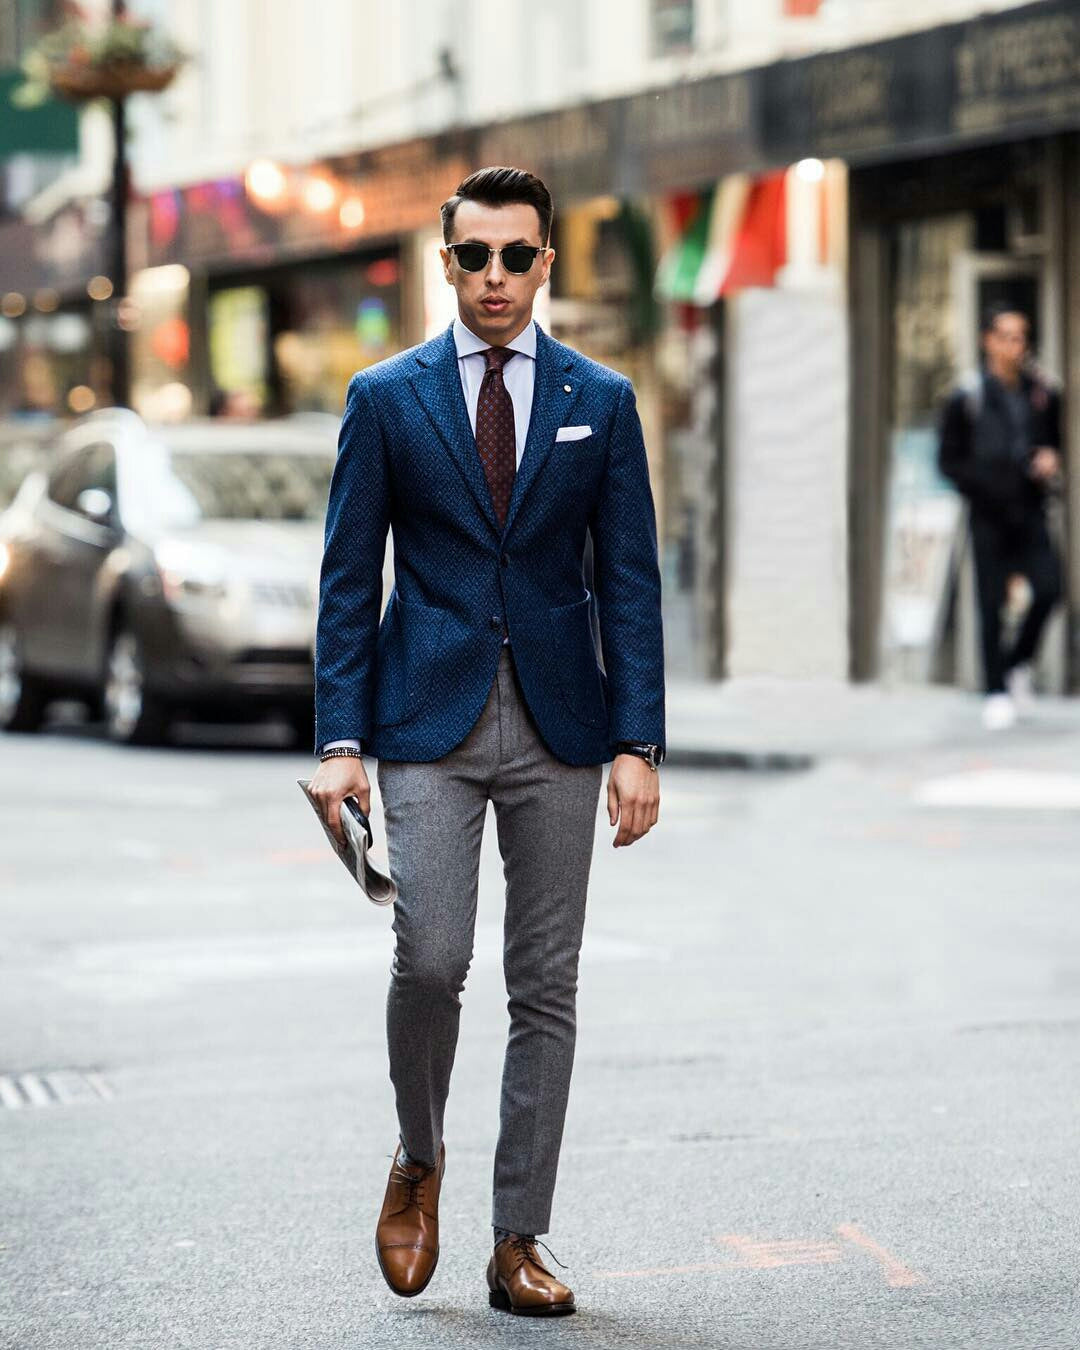 11 Amazing Work Outfit Ideas For Men – LIFESTYLE BY PS